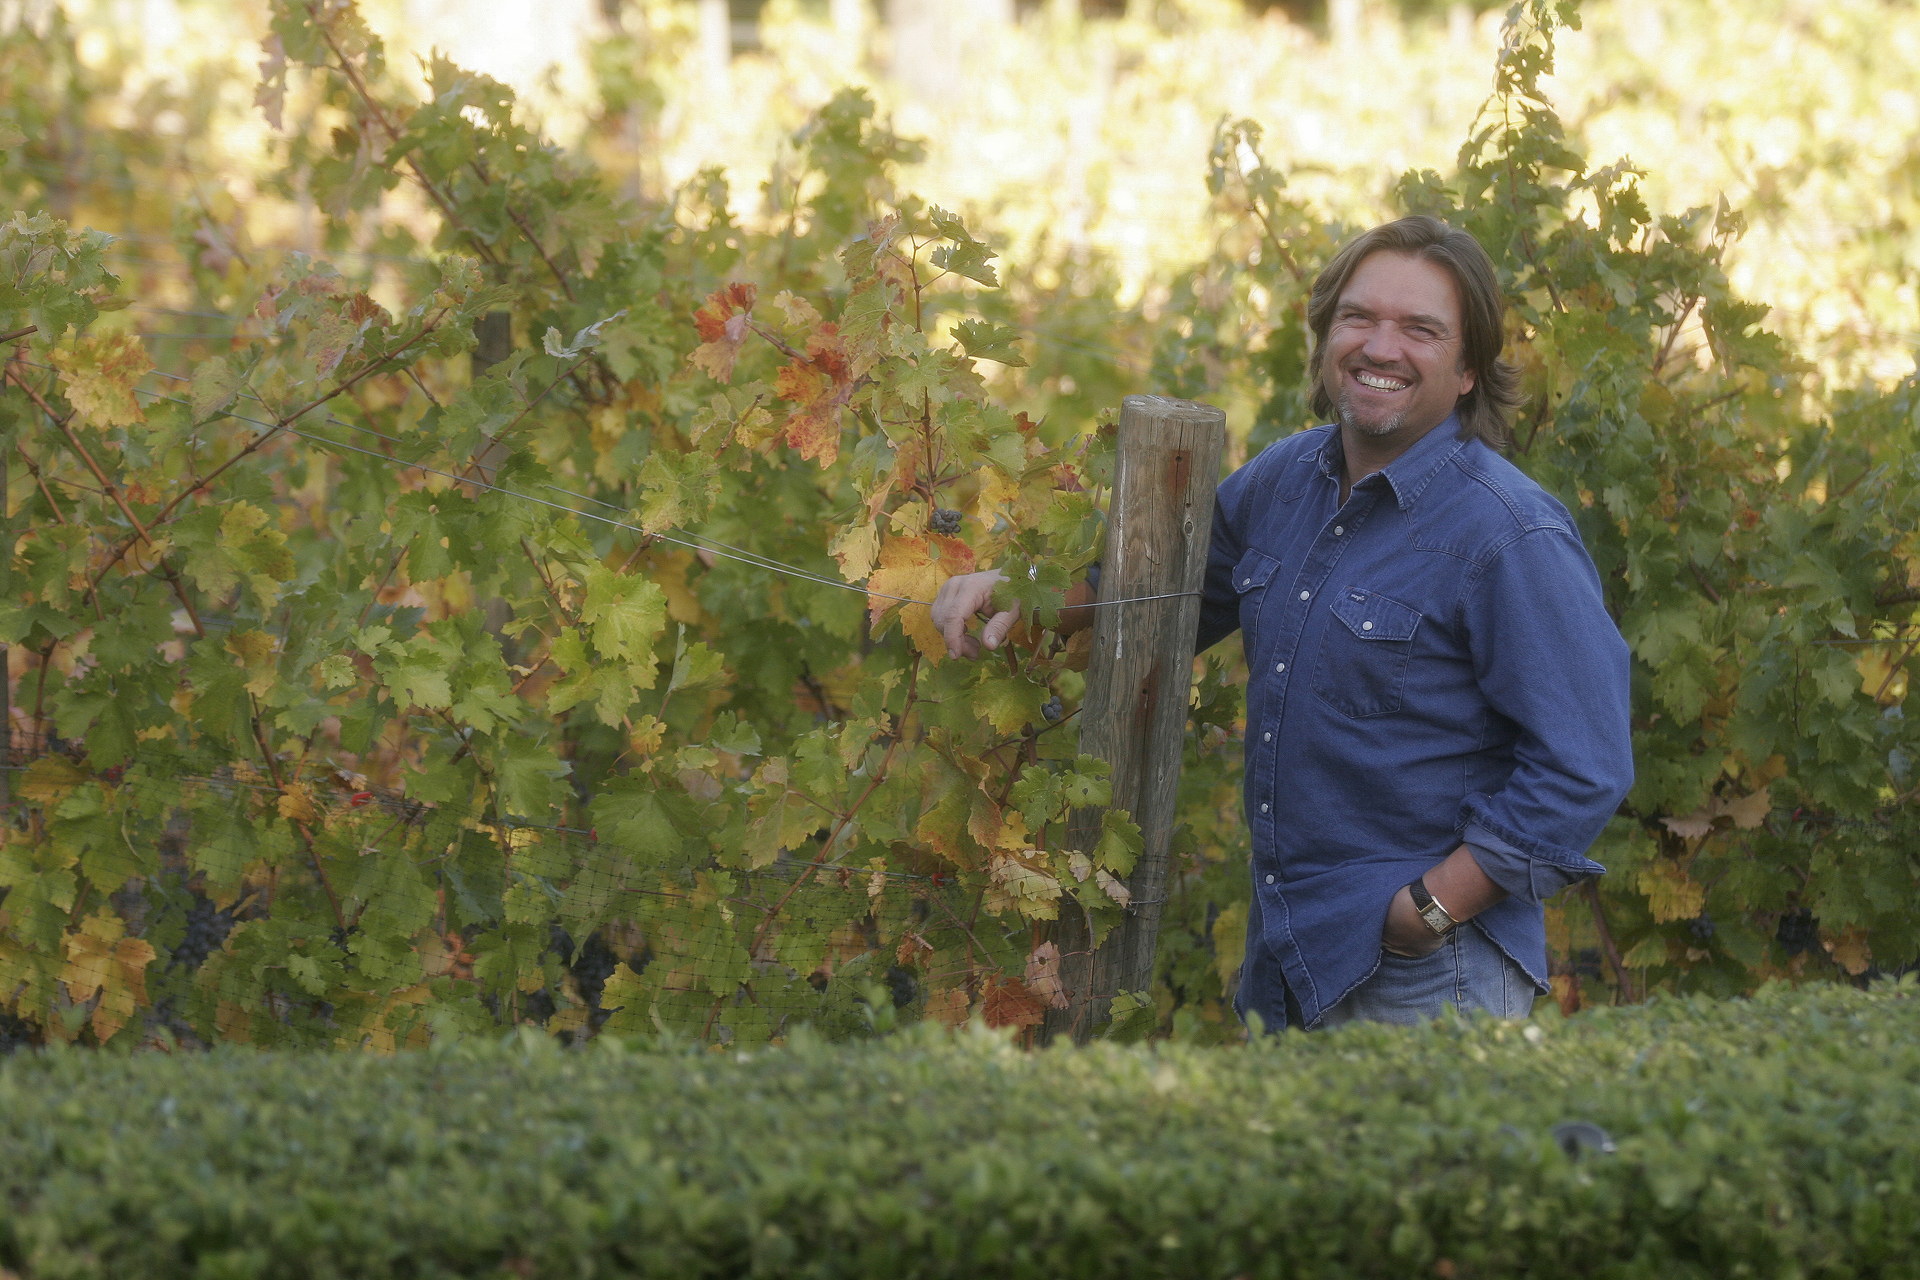 Winemaker Ron Mosley has been making wine for over 30 years and currently manages 80 vineyards located from Woodside to Gilroy, where his winery is located.